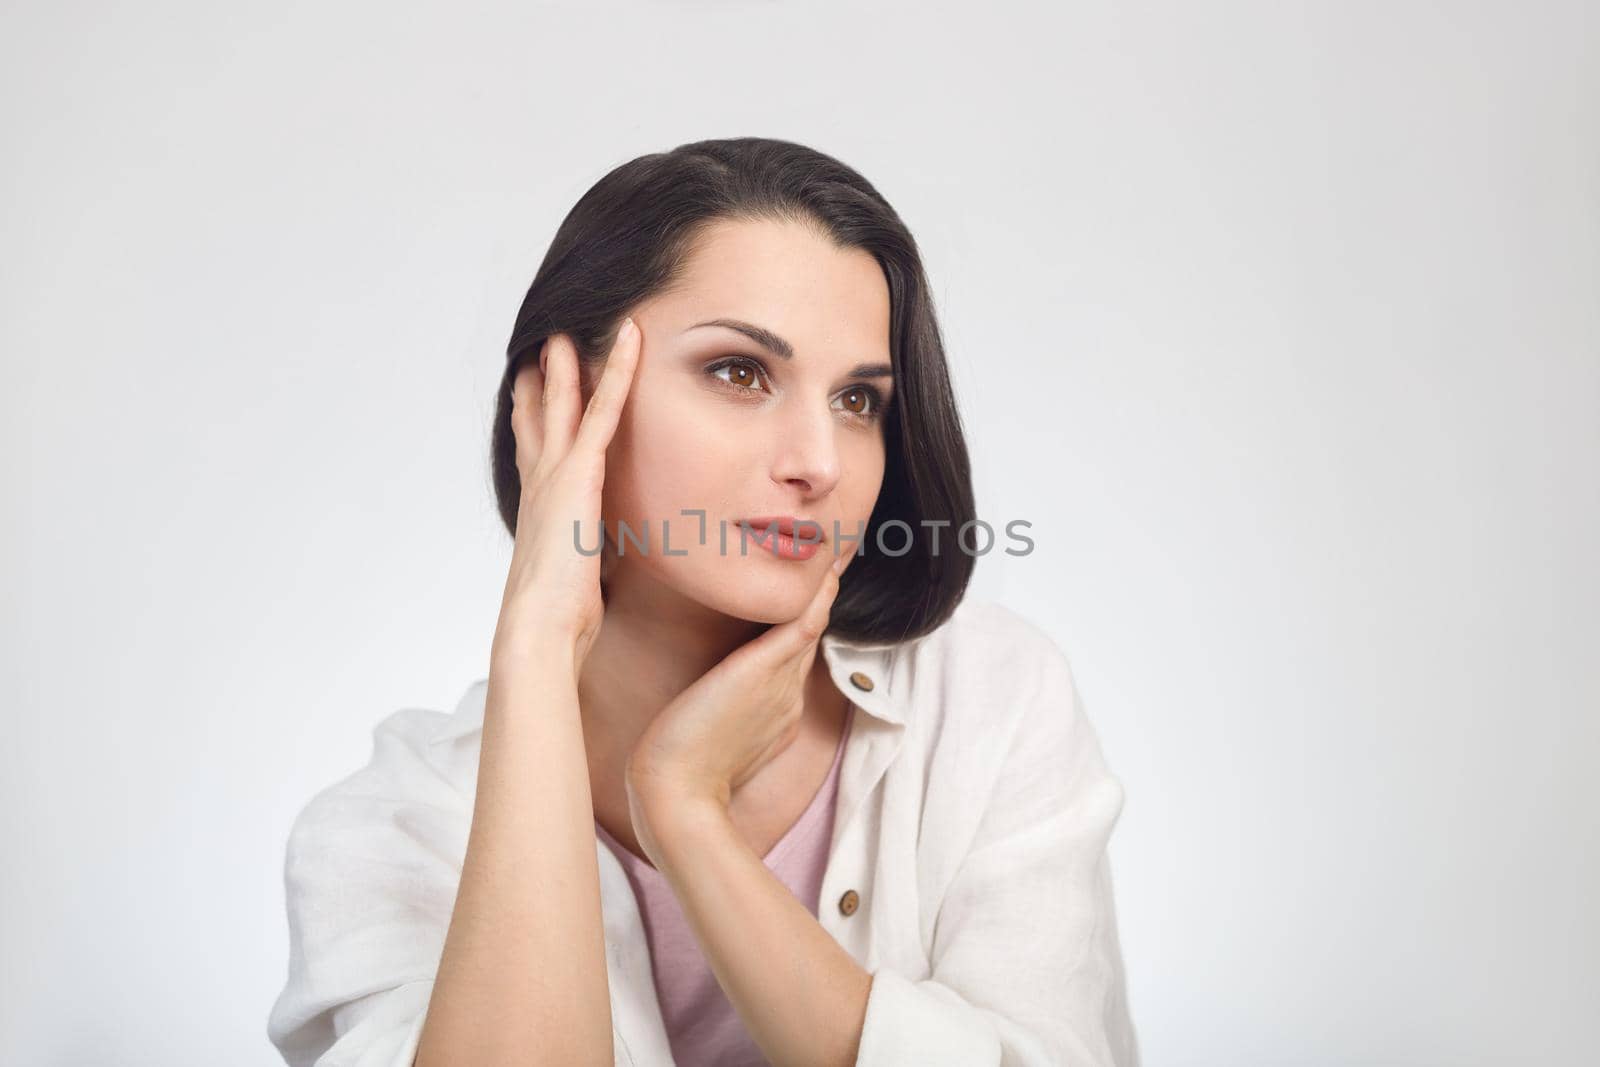 High-key headshot portrait of beautiful brunette female model with hands near face on white background.